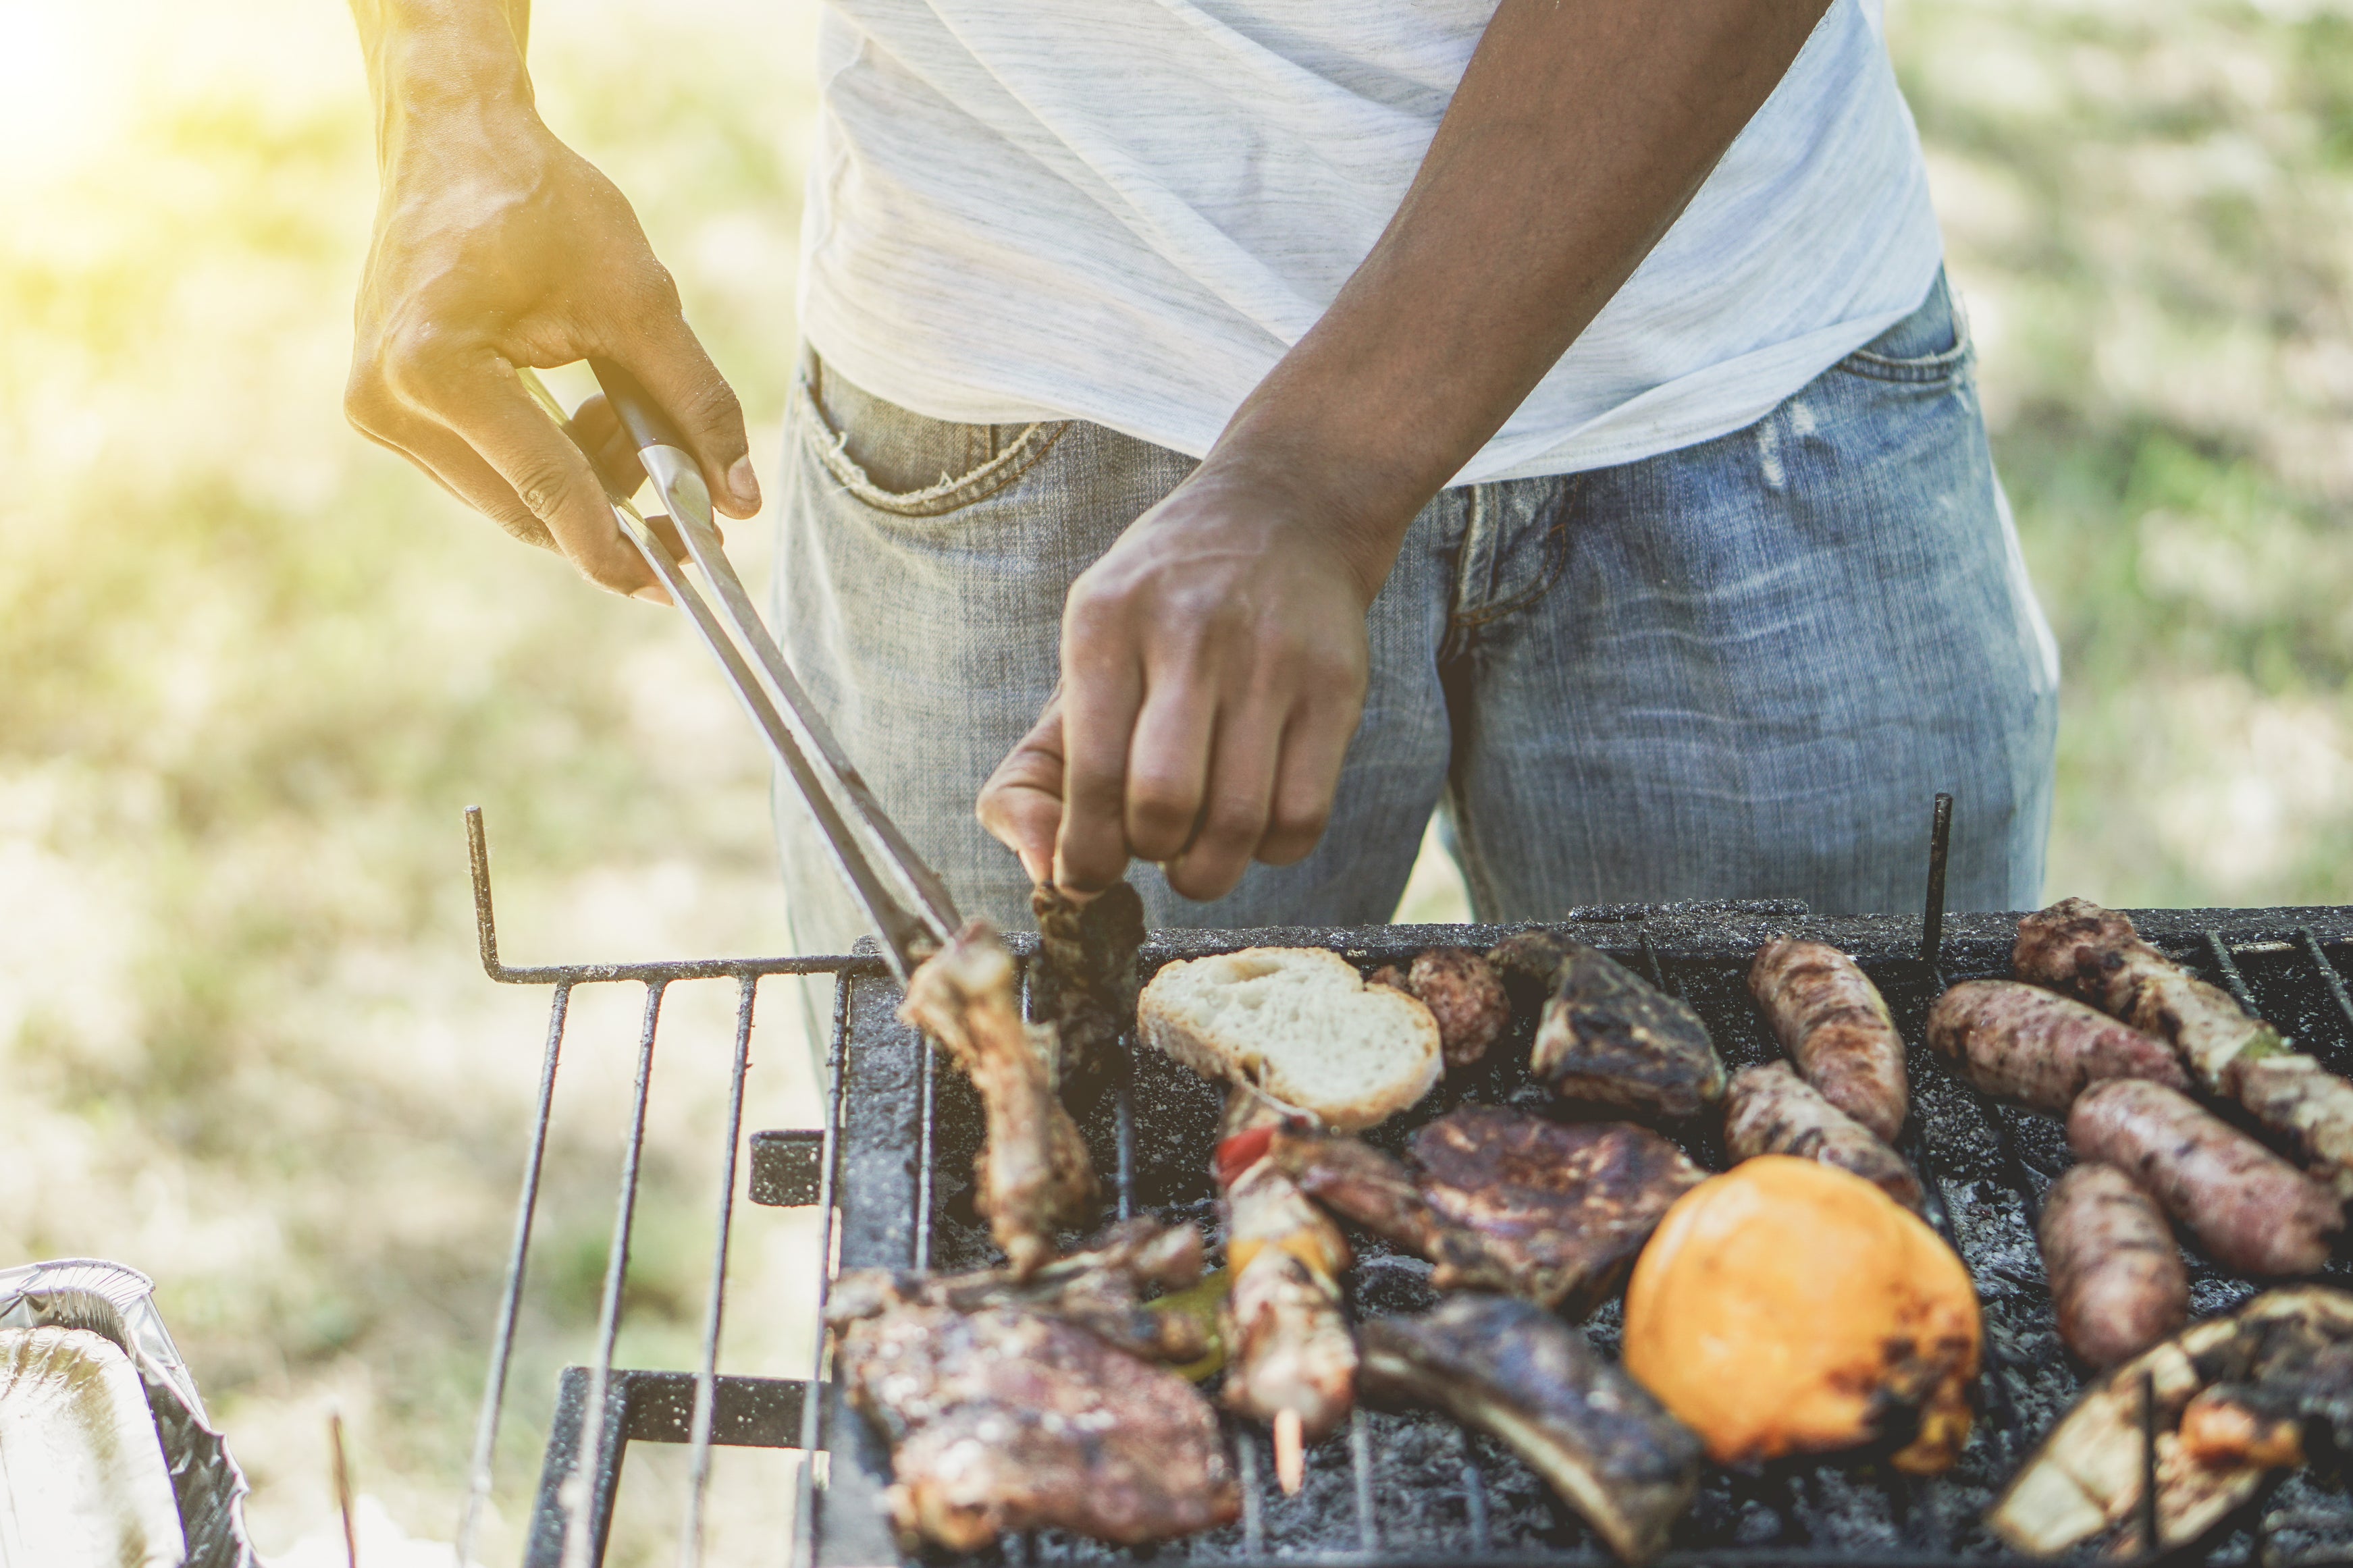 There are signs in the US that the black barbecuer is beginning to get racial justice